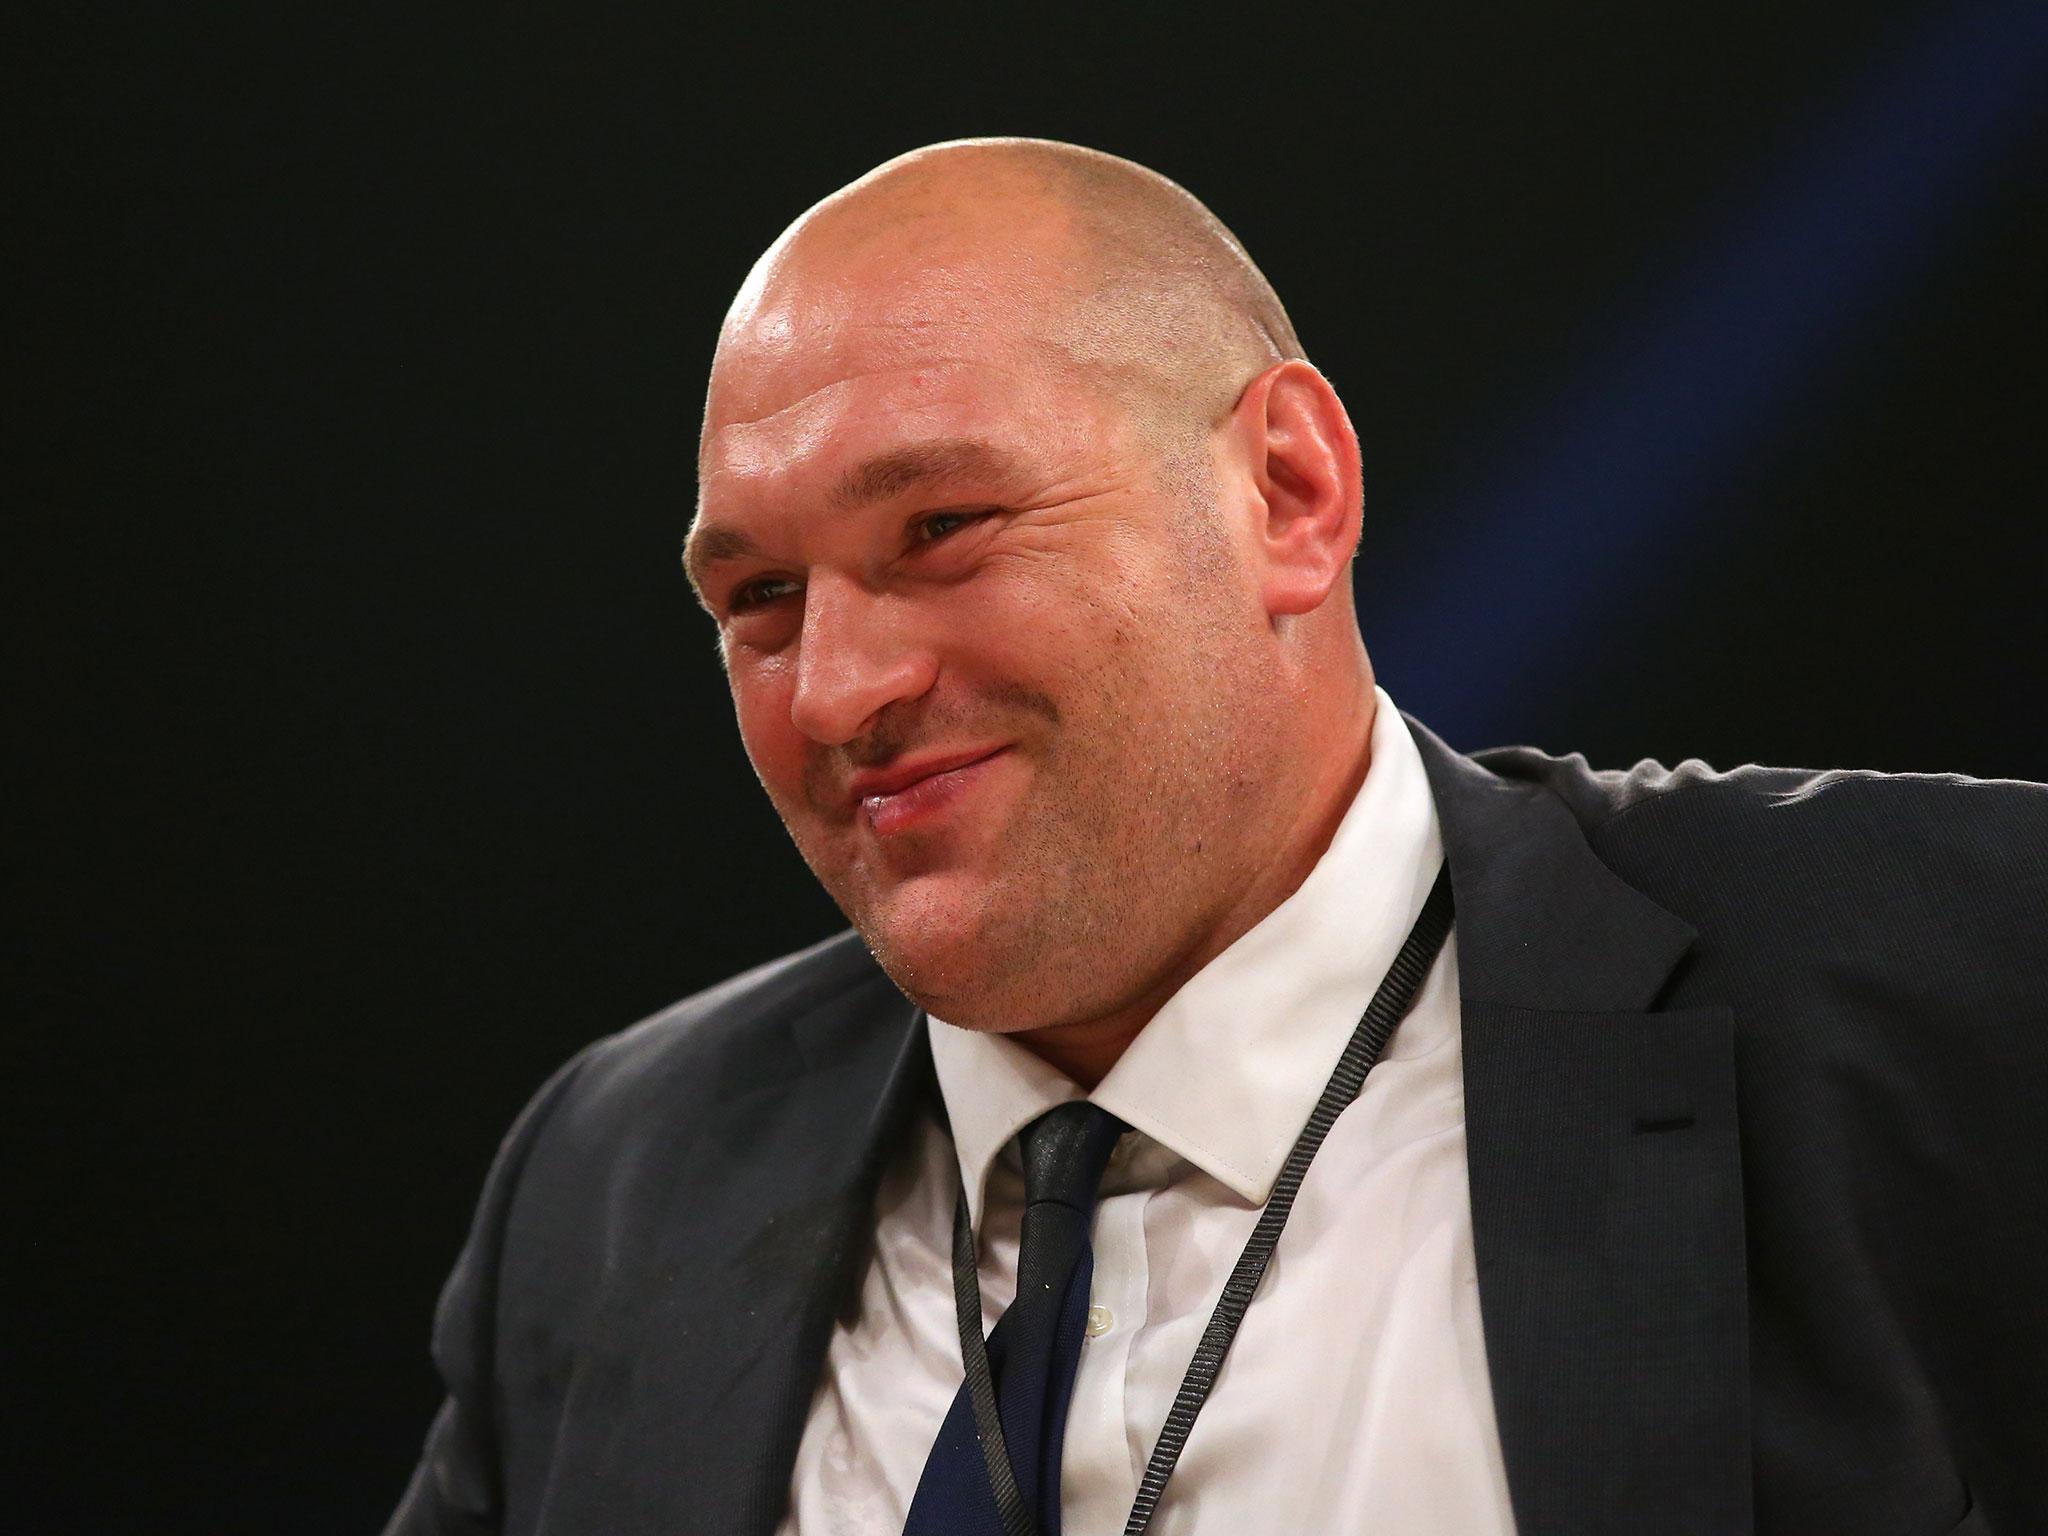 Tyson Fury's licence was suspended by the BBBC in October 2016 owing to 'anti-doping and medical issues'